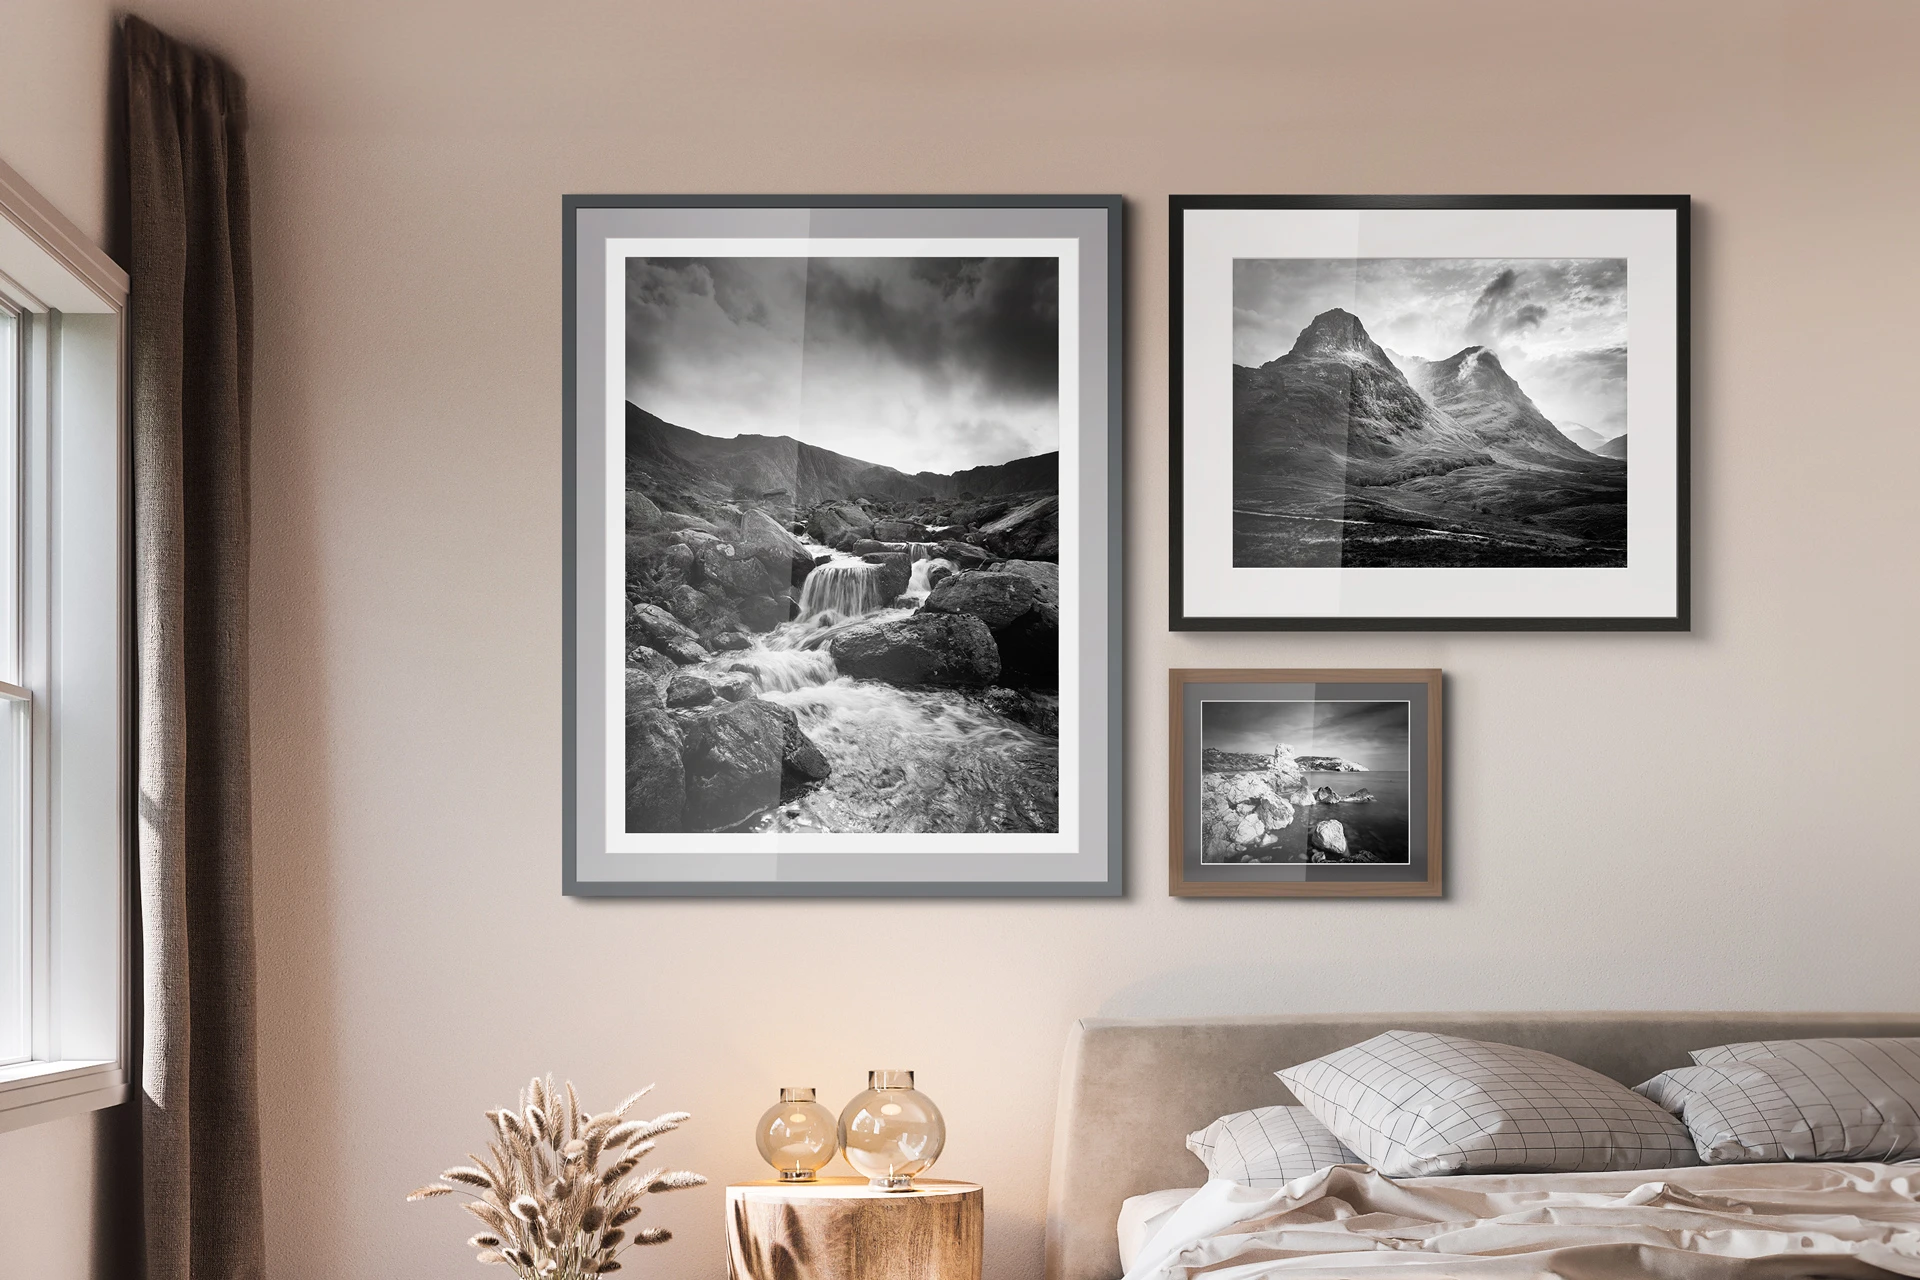 Landscape photographs in black and white.